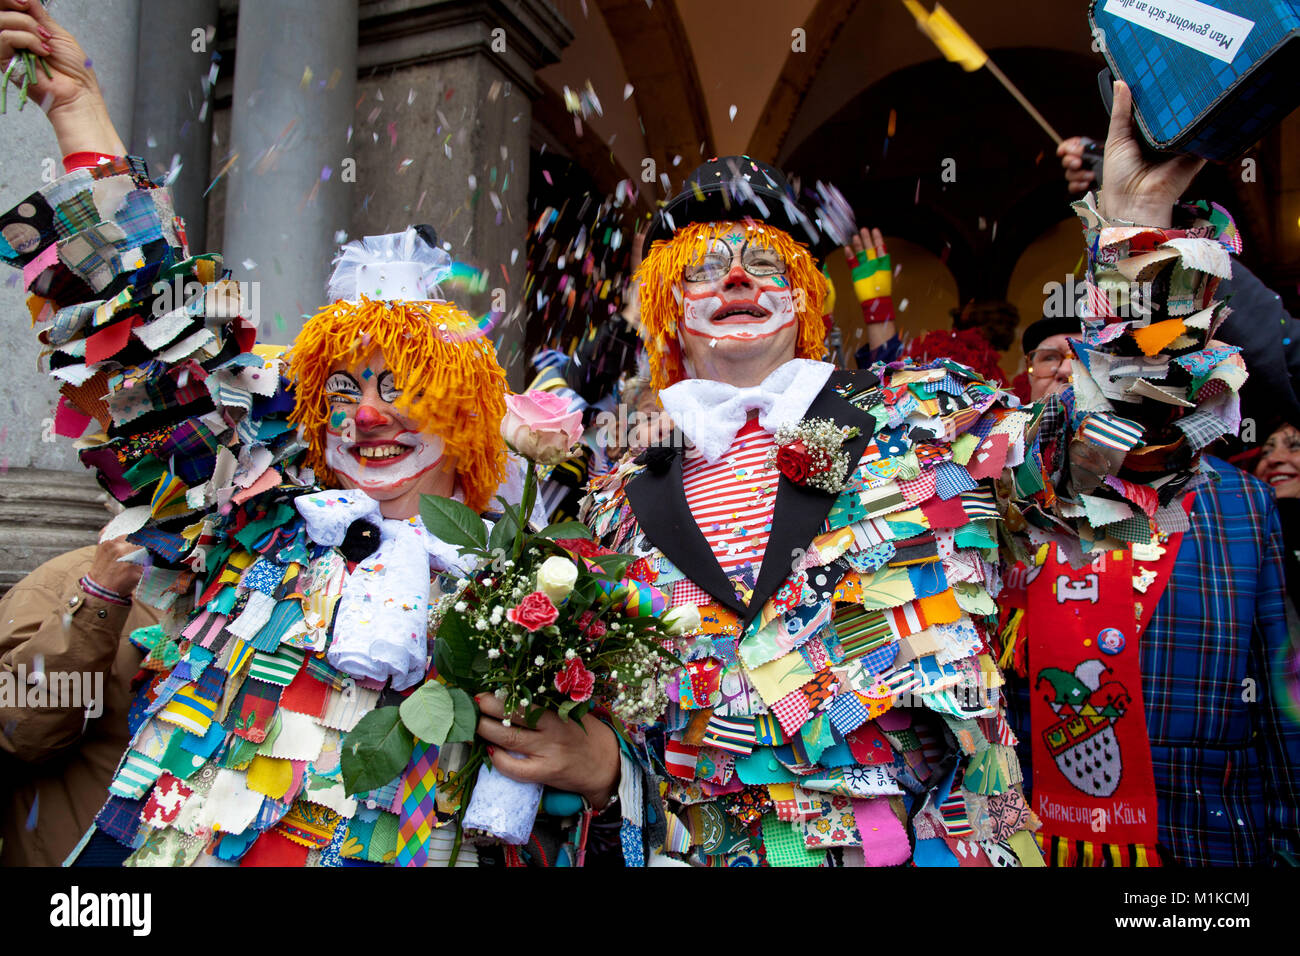 Europe, Germany, North Rhine-Westphalia, Cologne, carnival, bridal pair on November 11, 2011 (11.11.11, each year on this date the carnival starts) le Stock Photo